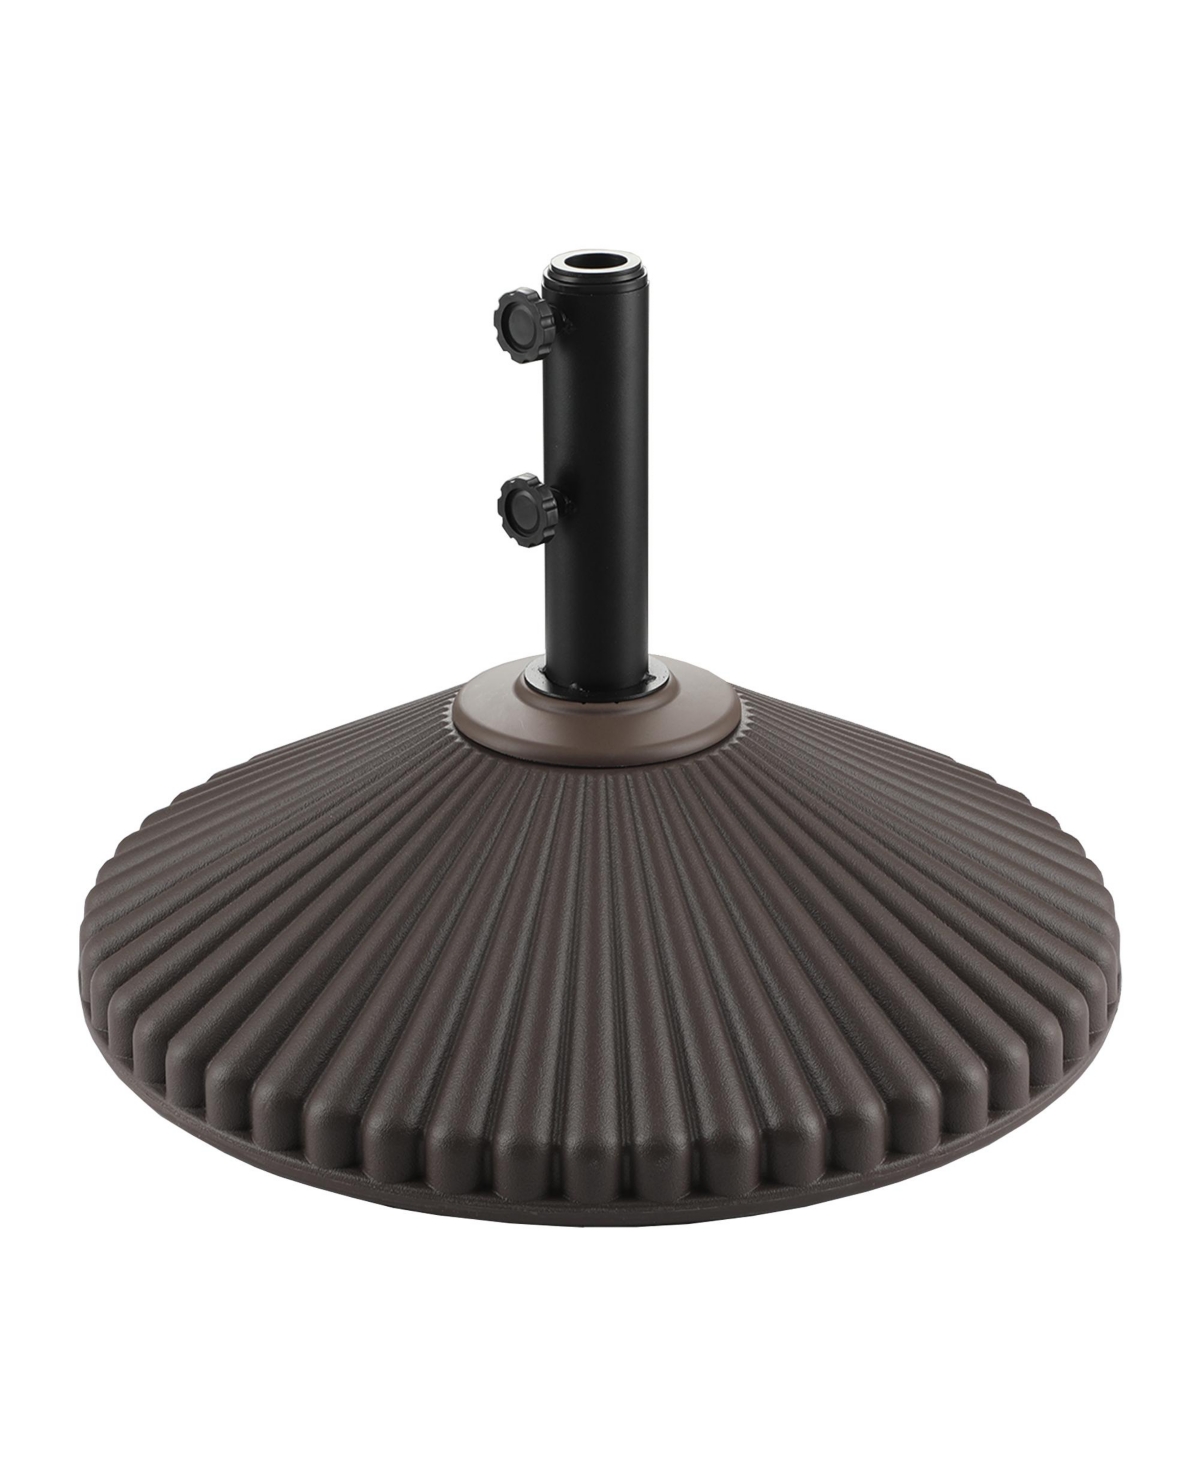 23" inch Fillable Heavy-Duty Round Plastic Umbrella Base Stand - Brown